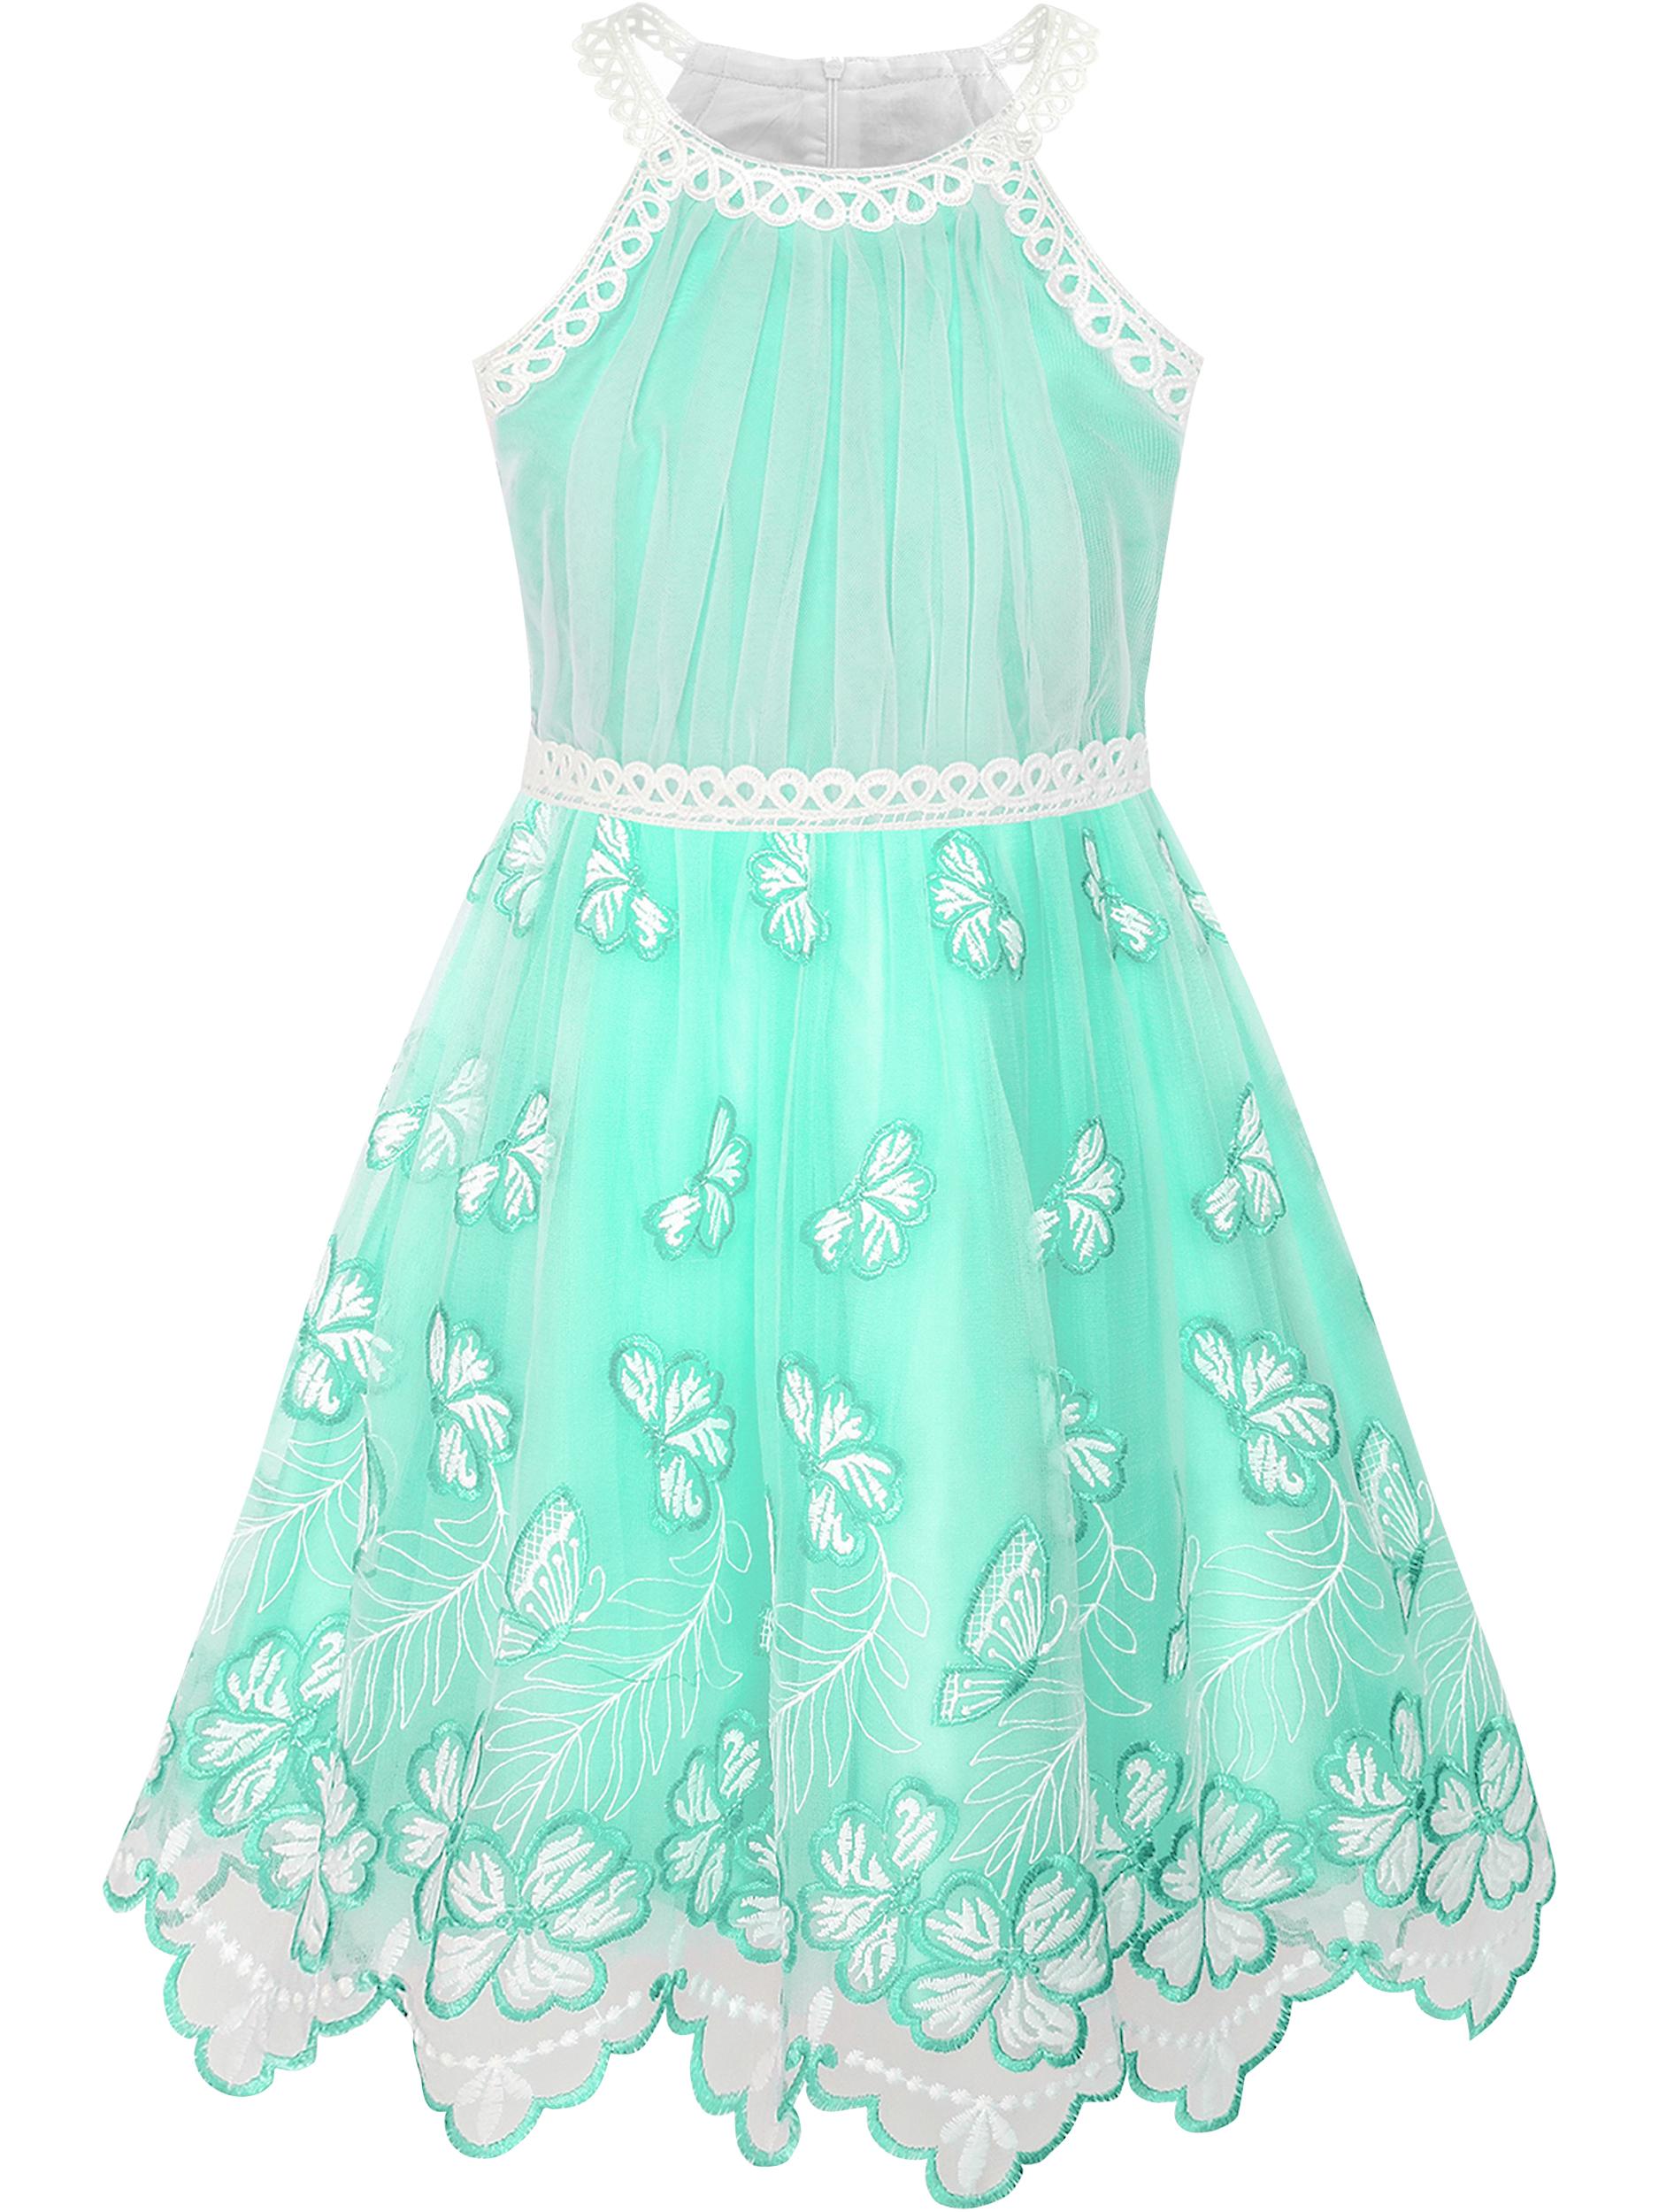 Girls Dress Turquoise Butterfly Embroidered Halter Dress Party 5 - image 1 of 7